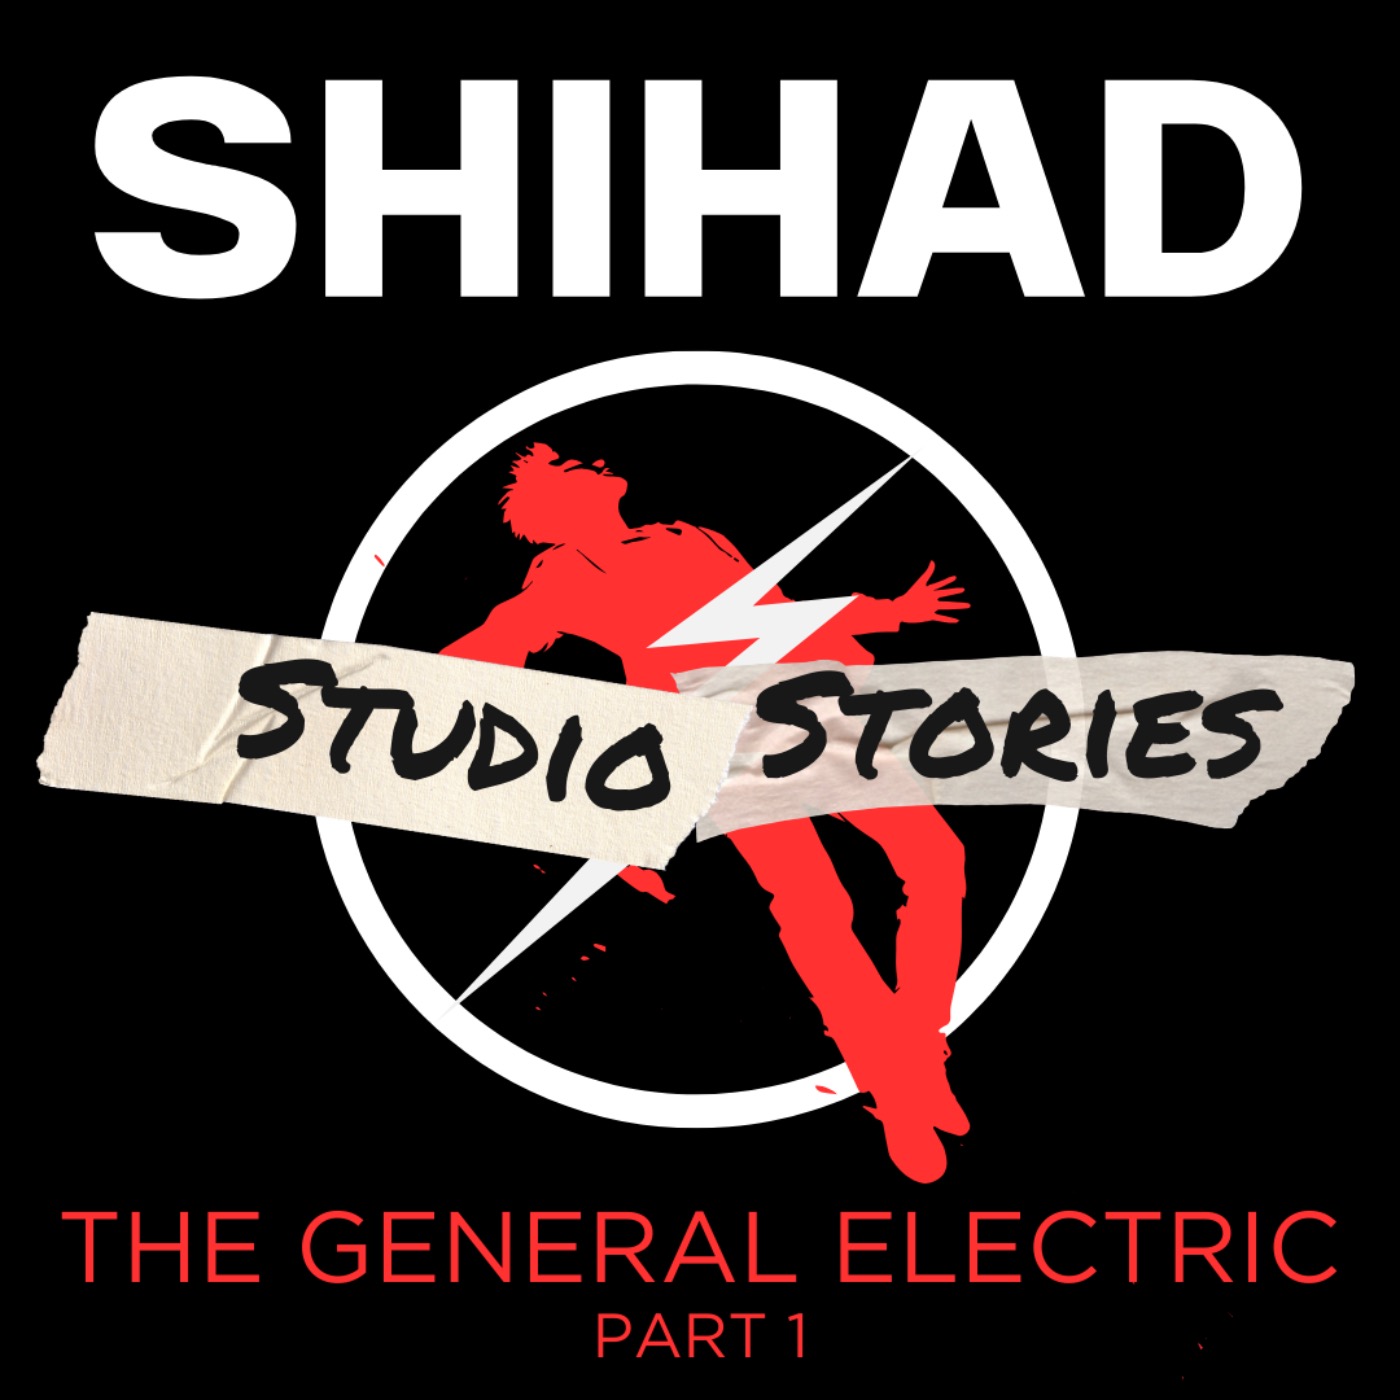 Shihad - The General Electric Part 1 w/Karl Kippenberger And Gggarth Richardson